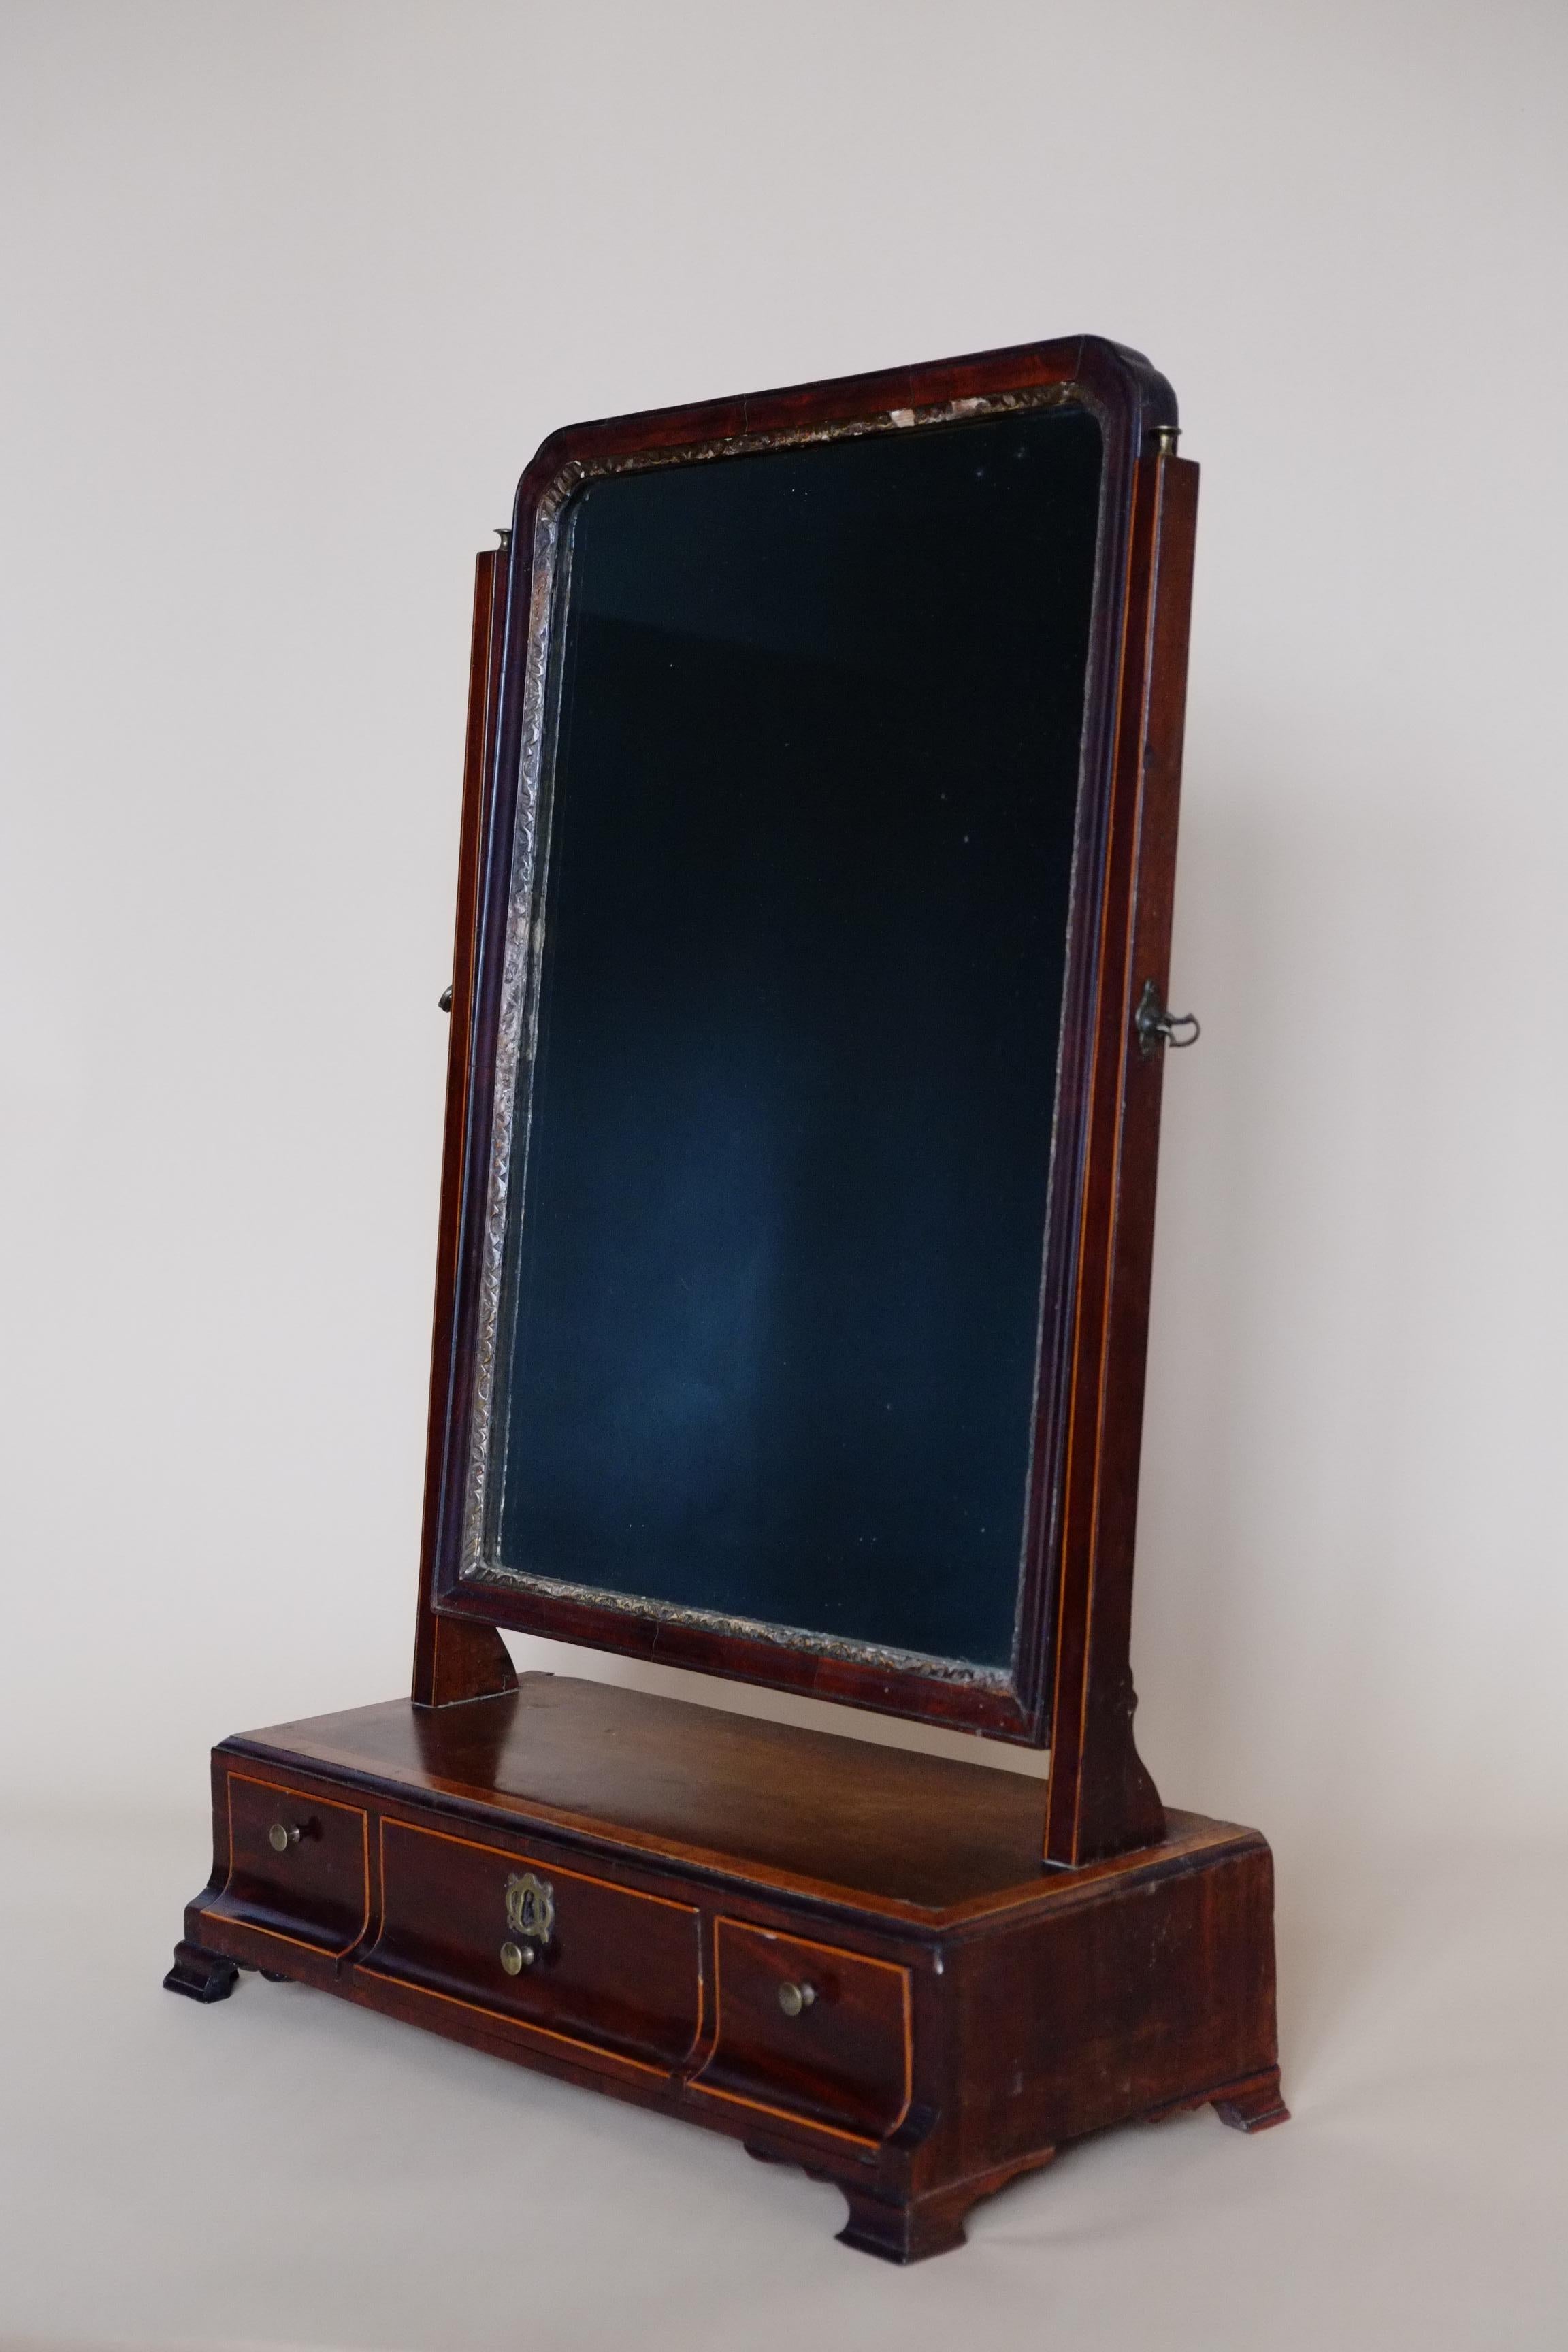 Georgian Inlaid Mahogany & Maple English Vanity Table Mirror with Drawers  For Sale 10